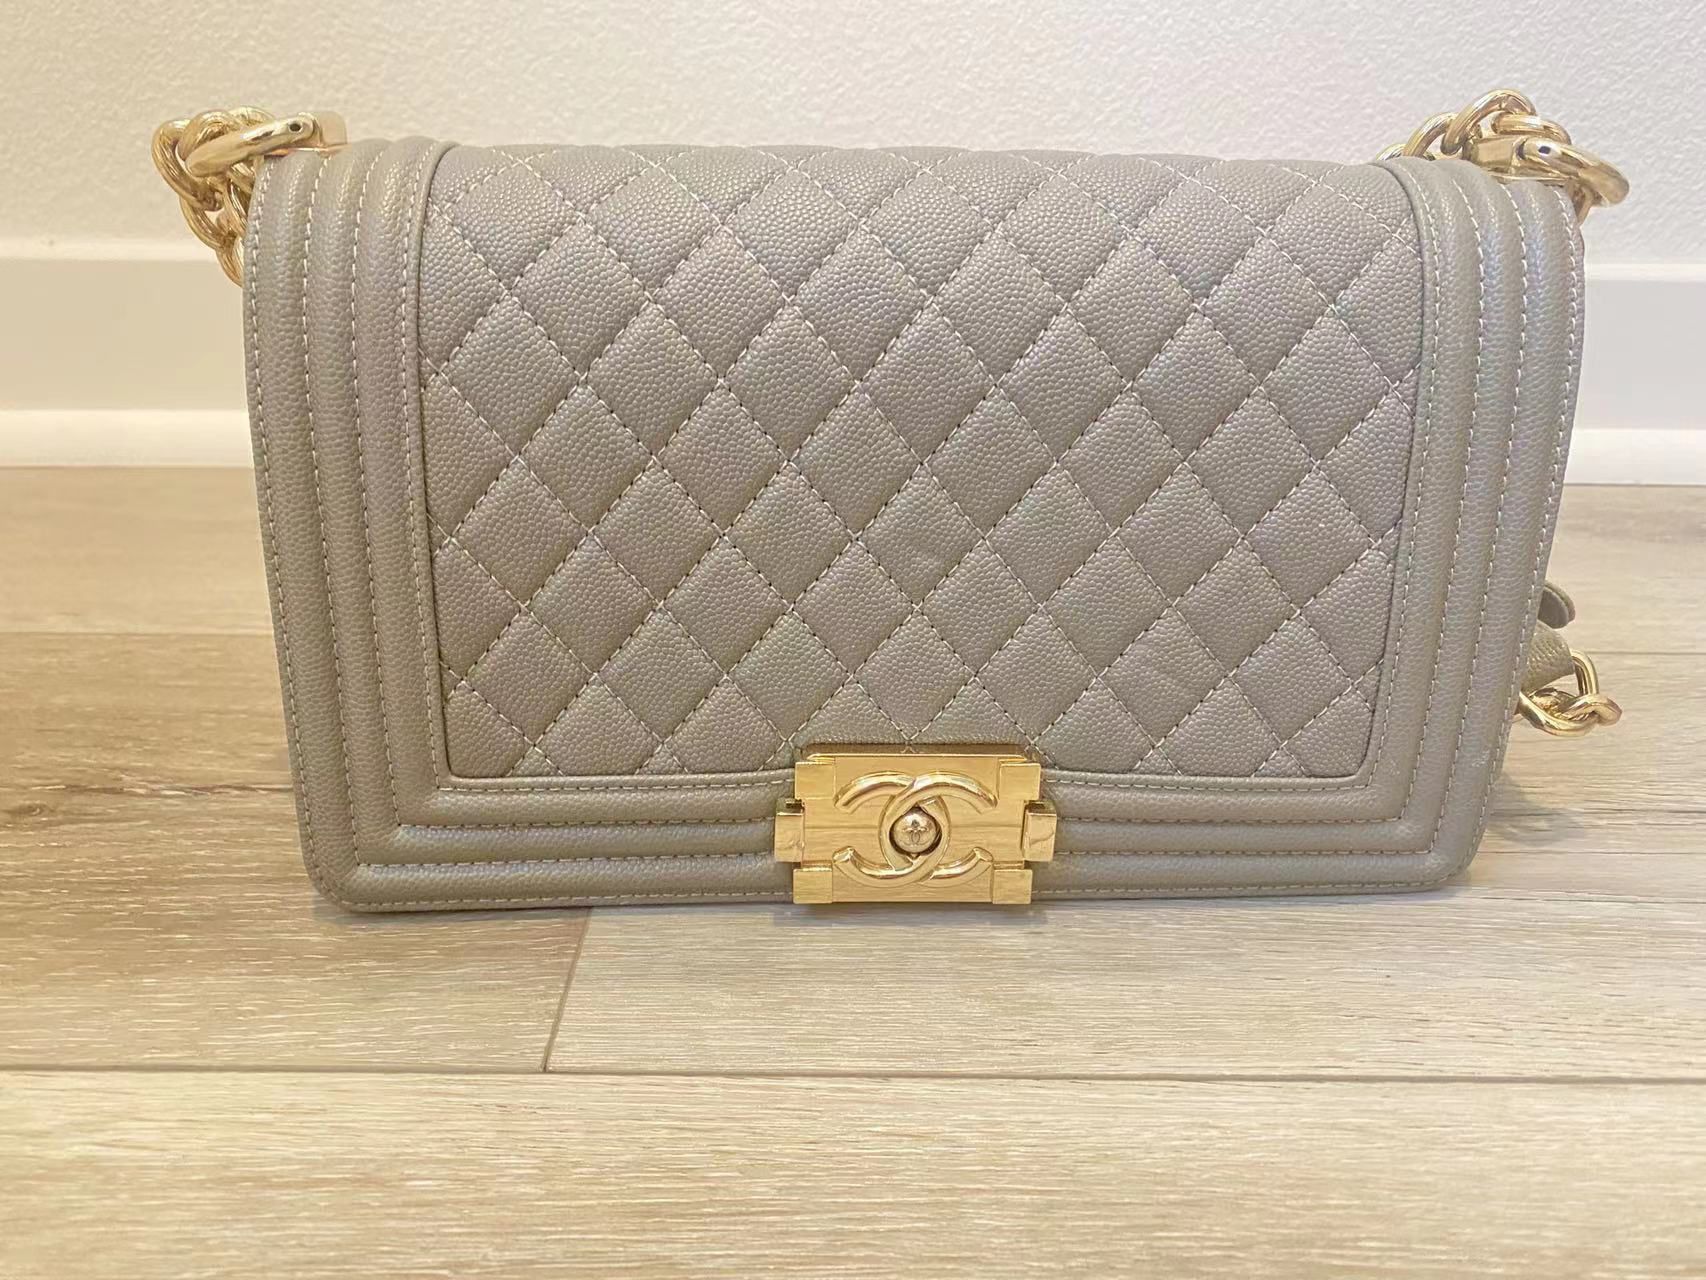 Fashion Bag For Women In Great Condition 